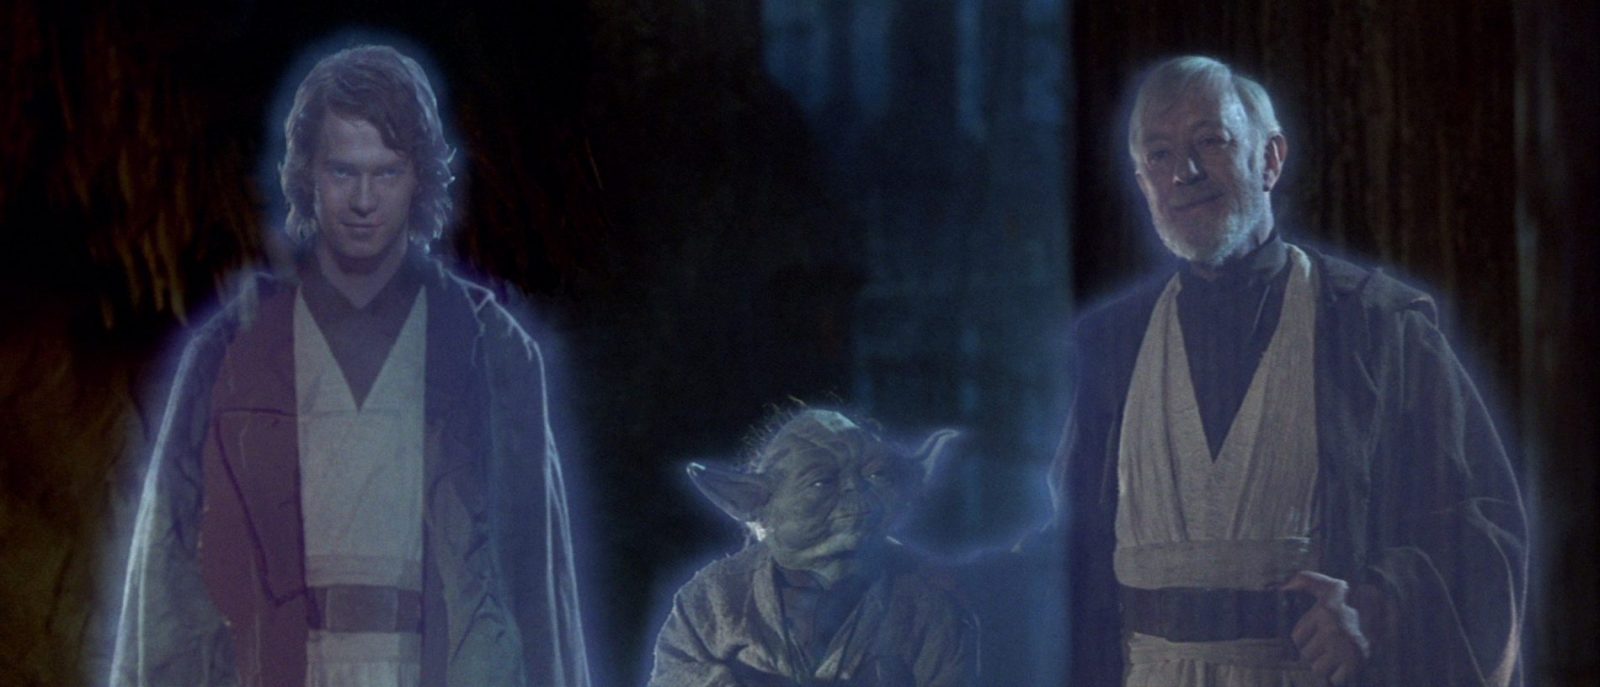 Only a True Movie Nerd Can Get 15/15 on This Movie Quotes Quiz. Can You? Jedi ghosts